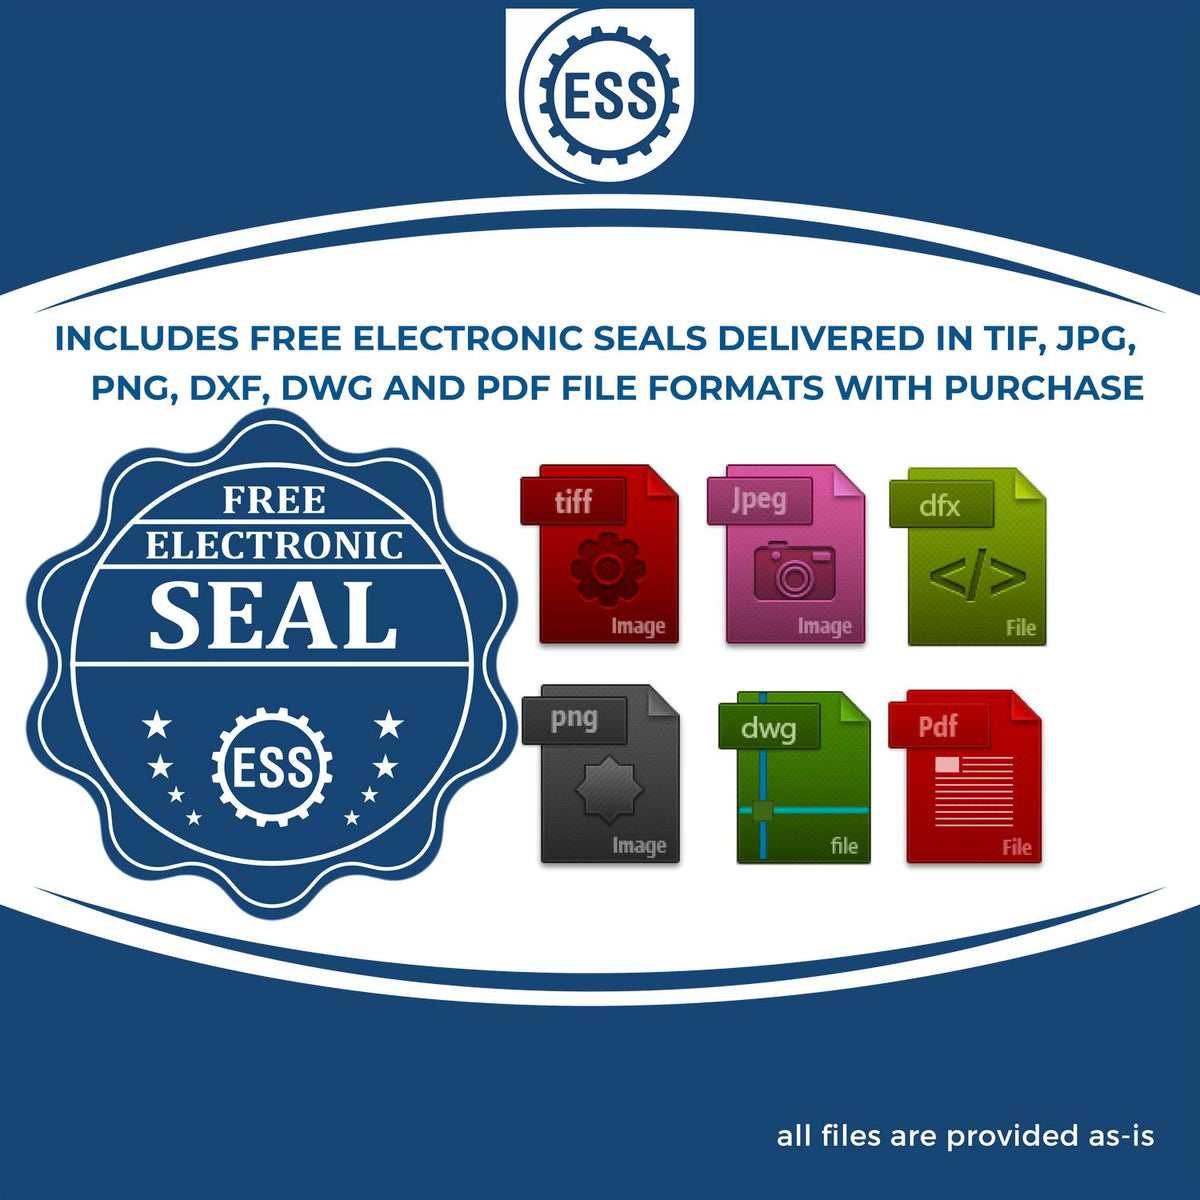 An infographic for the free electronic seal for the Heavy-Duty New Jersey Rectangular Notary Stamp illustrating the different file type icons such as DXF, DWG, TIF, JPG and PNG.